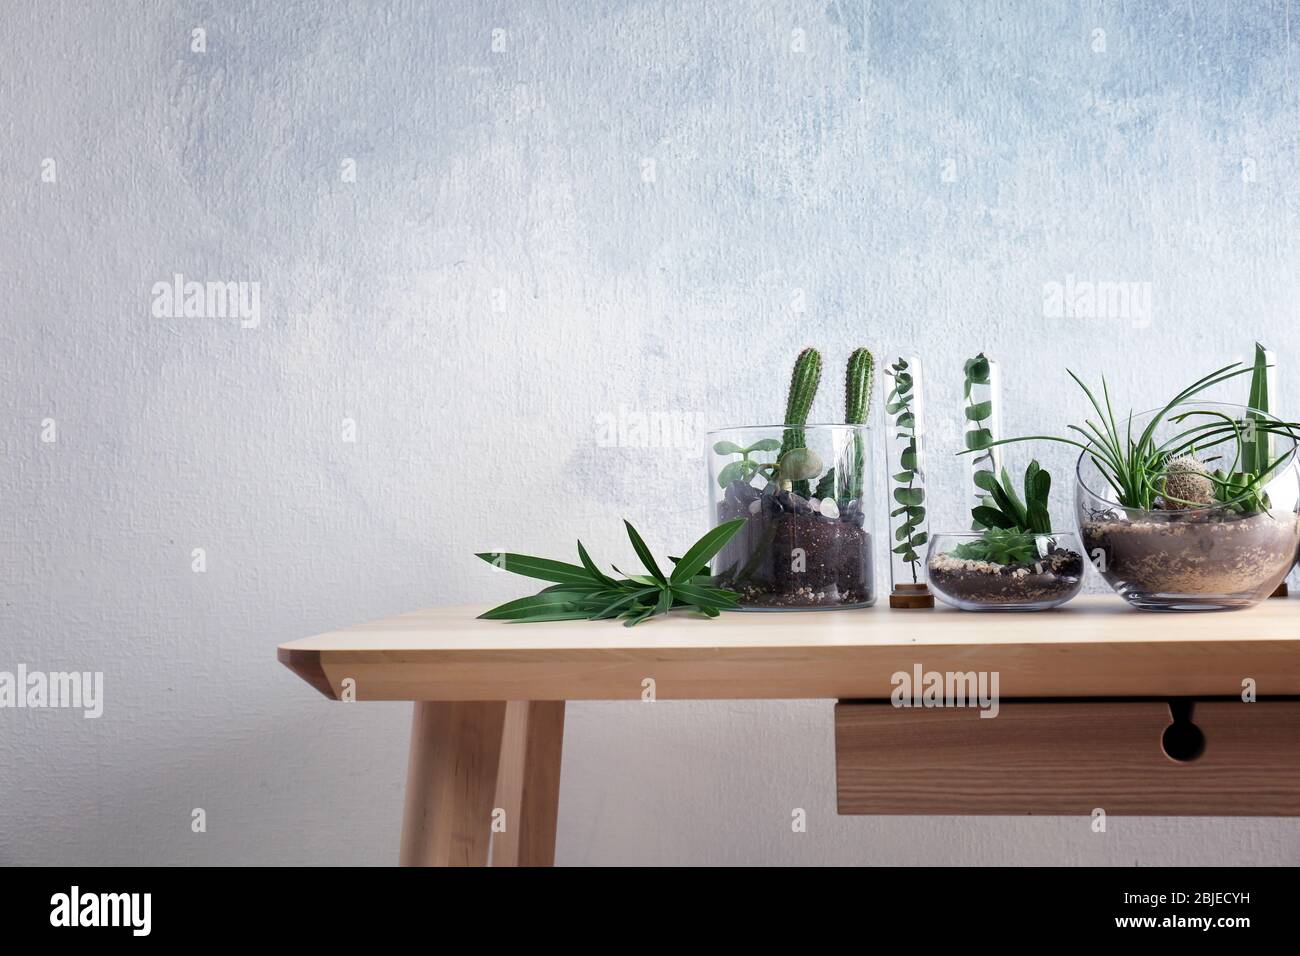 Florarium in glass vases with succulents on wooden table Stock Photo